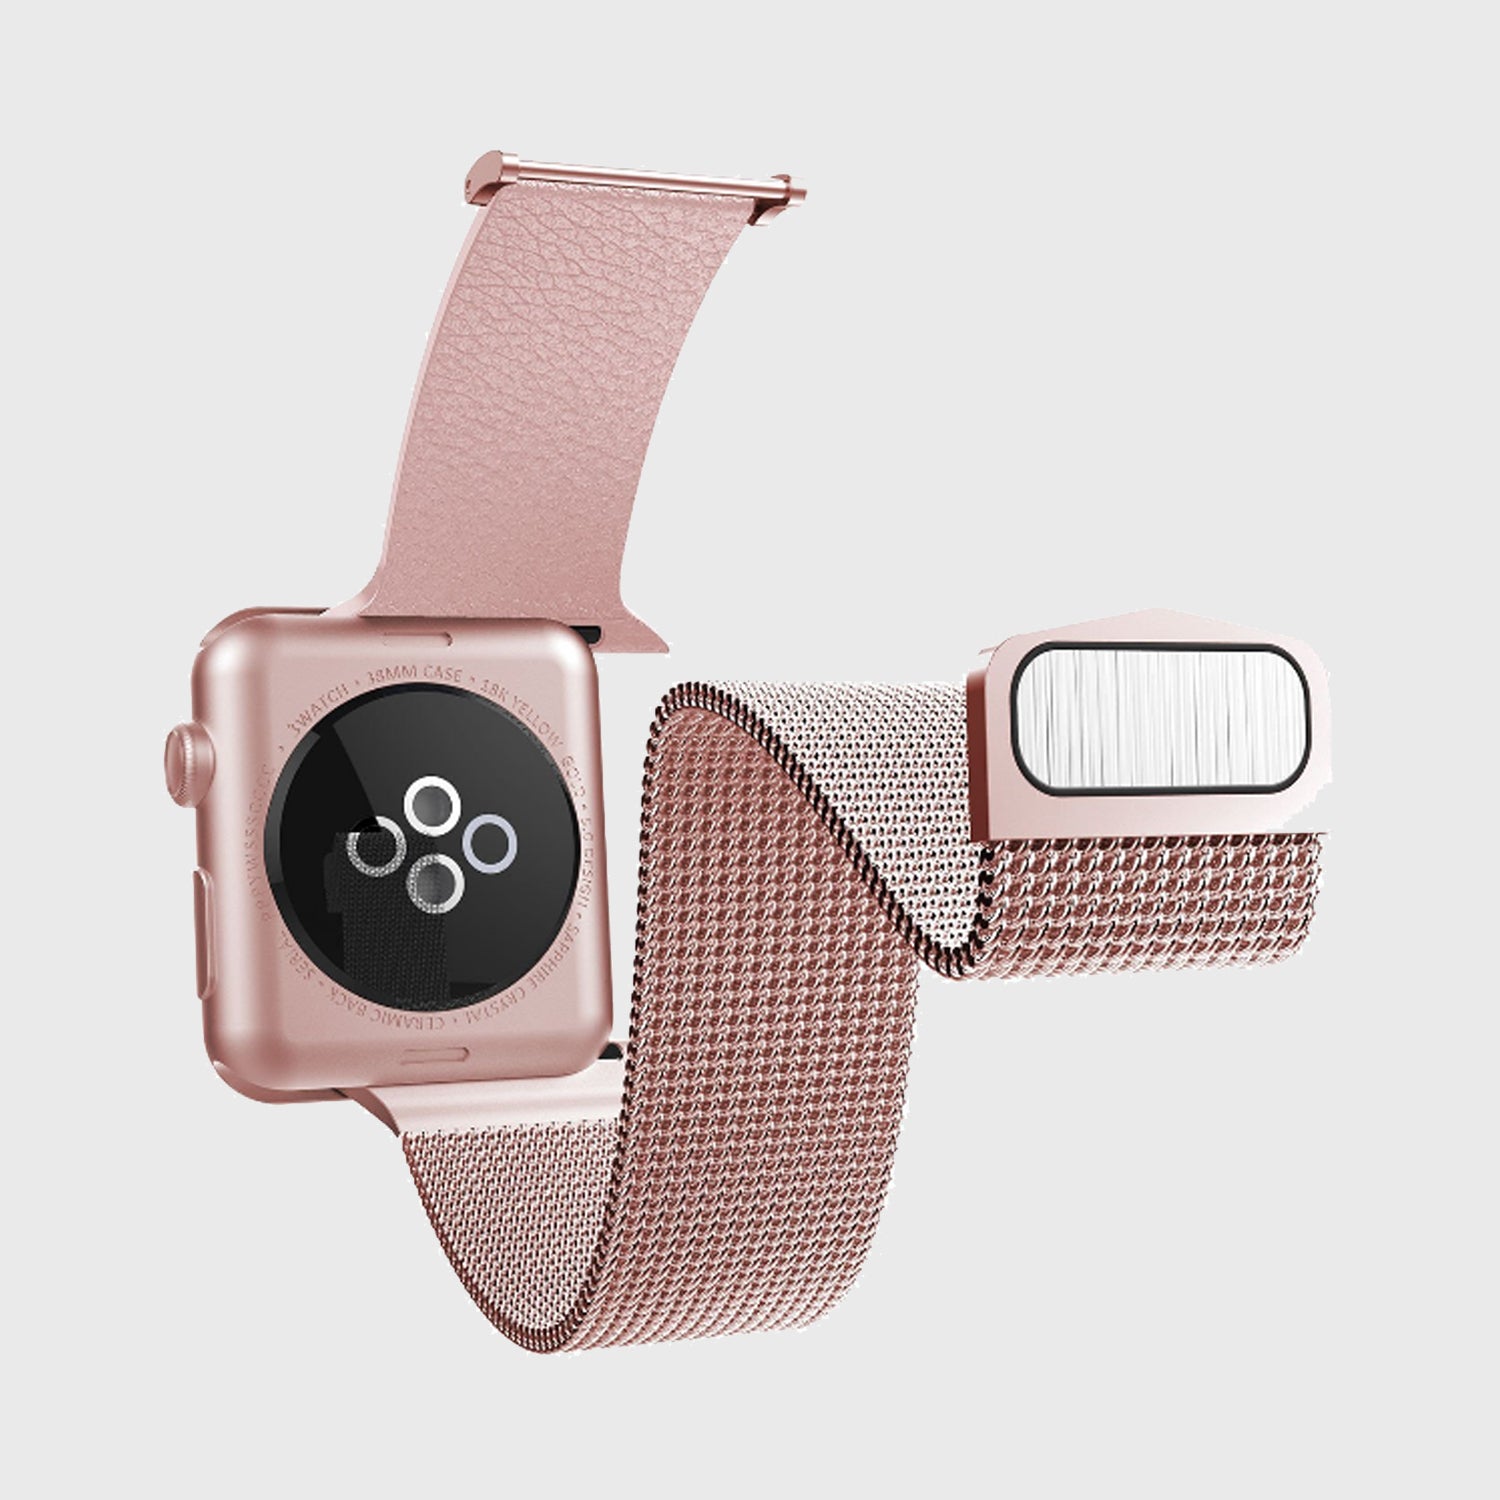 A Raptic Apple Watch with a Mesh Band.